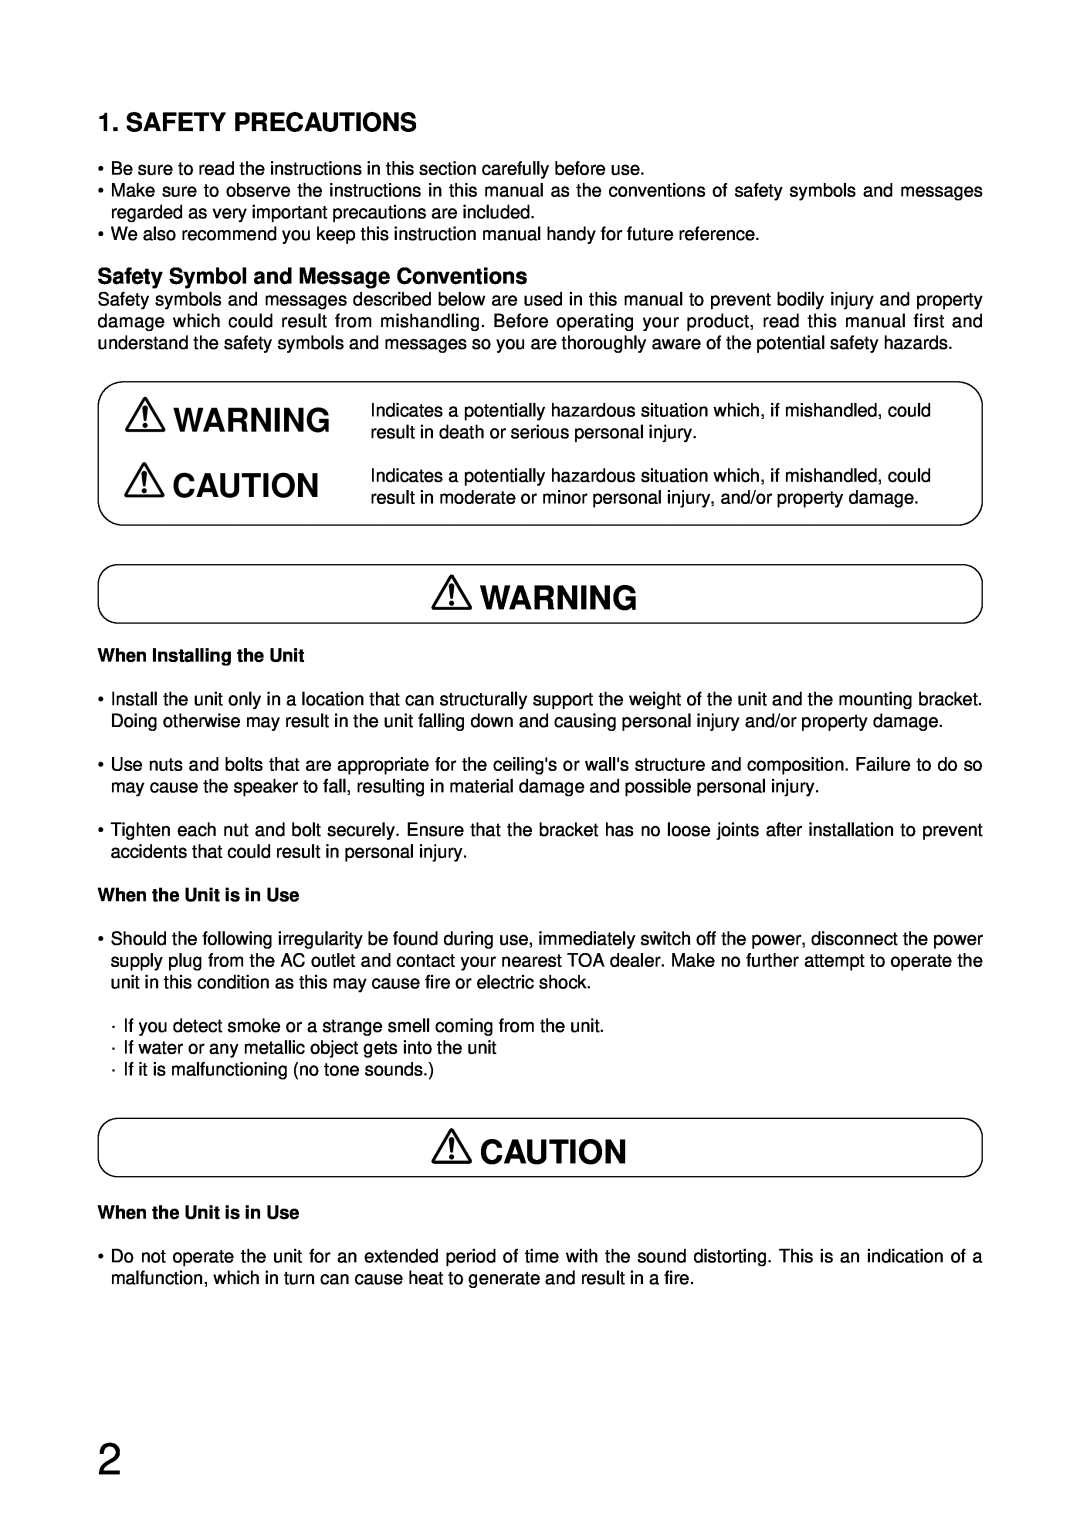 TOA Electronics HB-1 Safety Precautions, Safety Symbol and Message Conventions, When Installing the Unit 